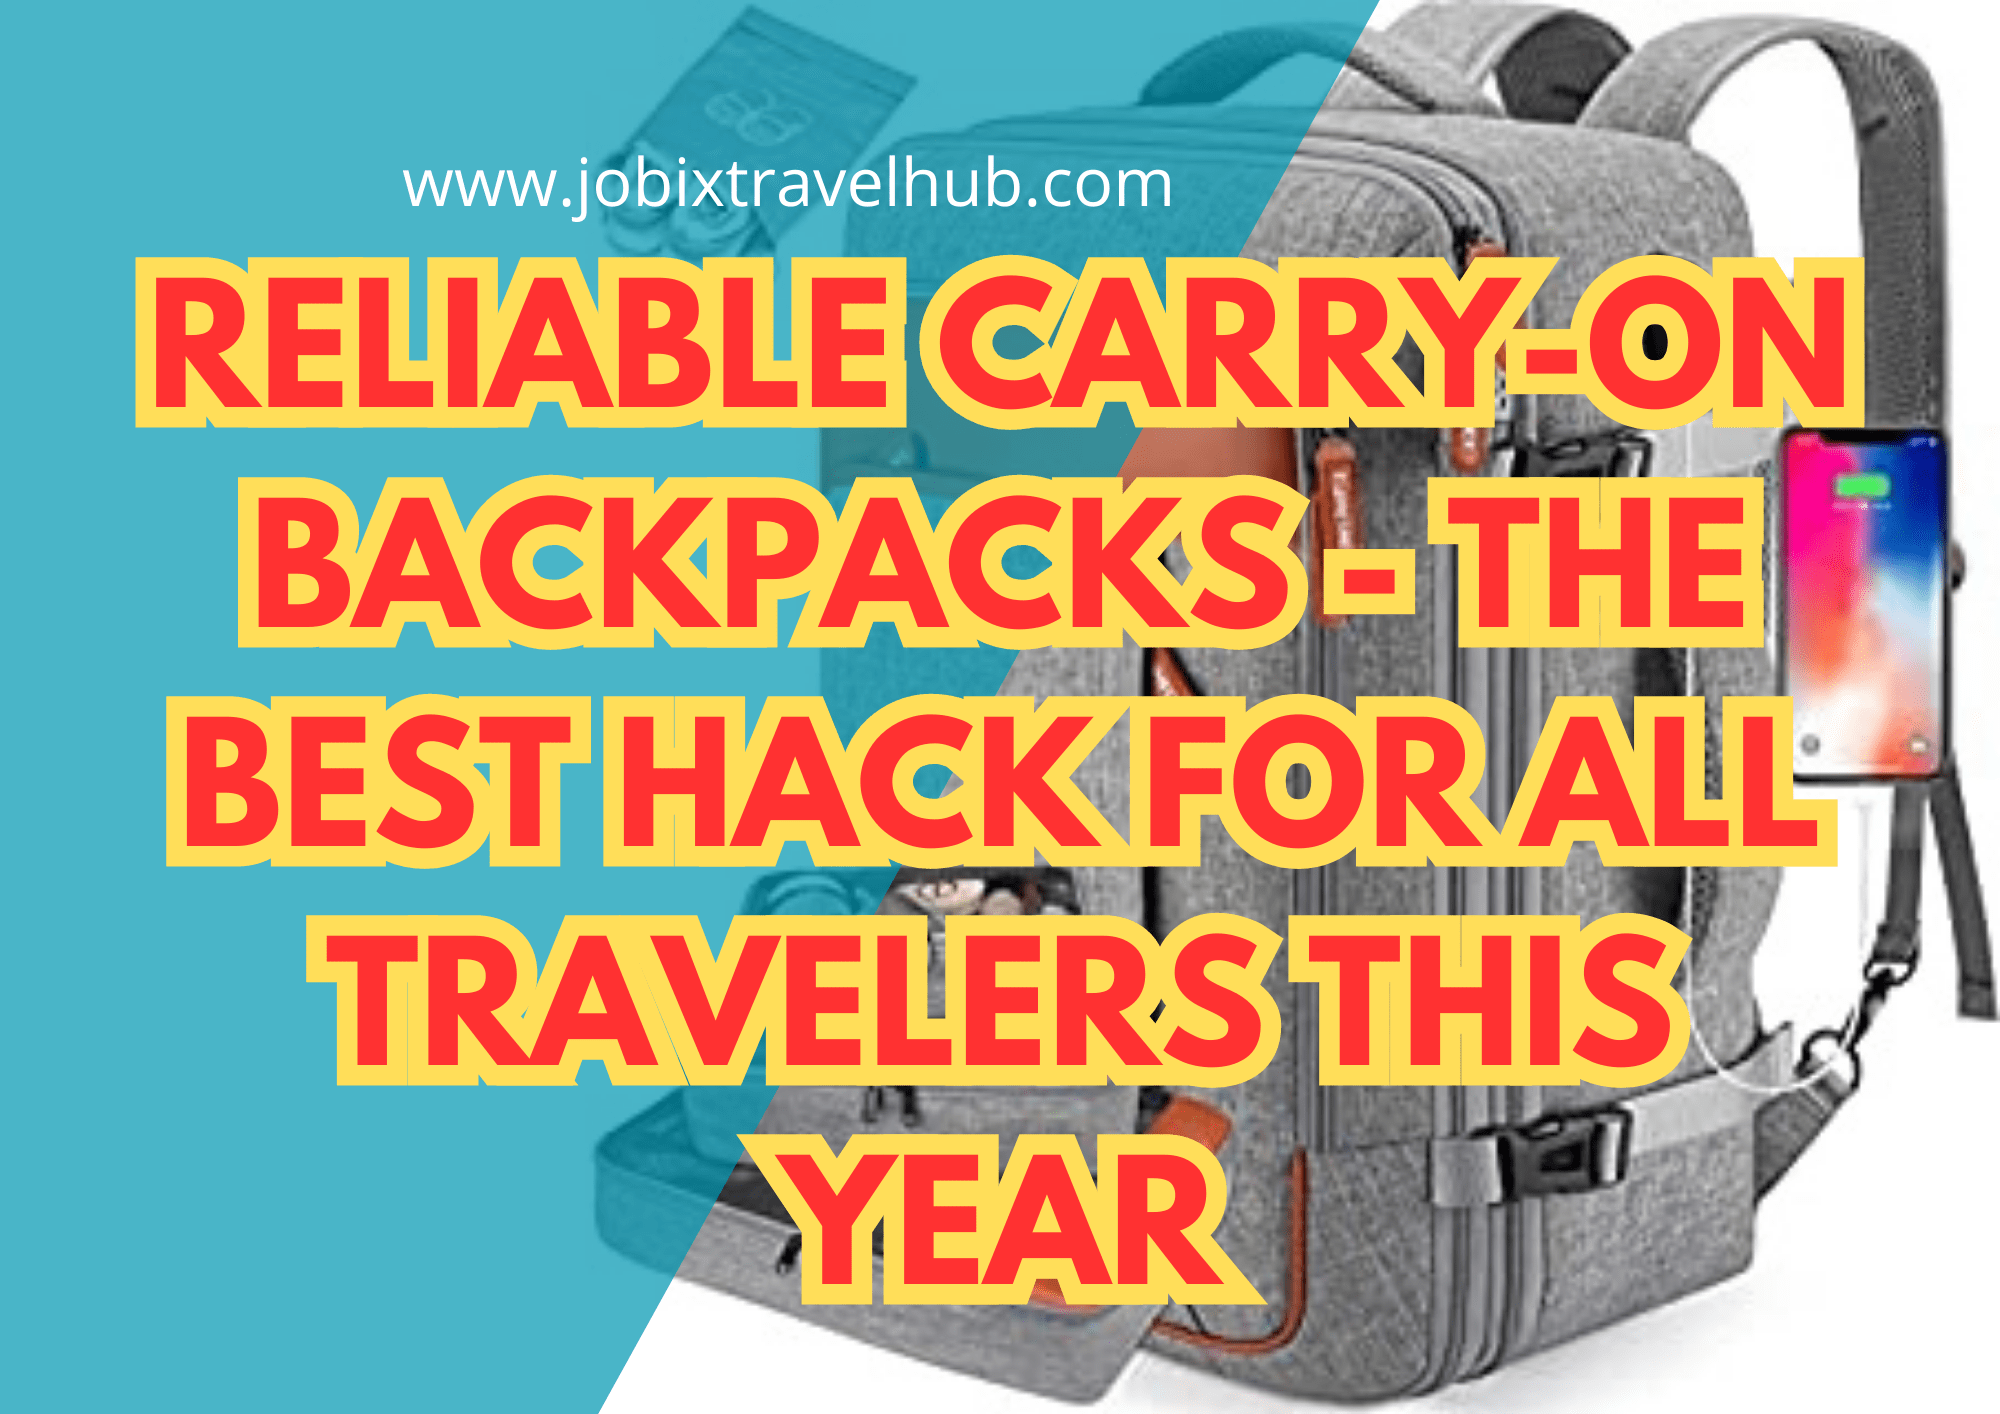 Reliable Carry-On Backpacks - The Best Hack For All Travelers This Year